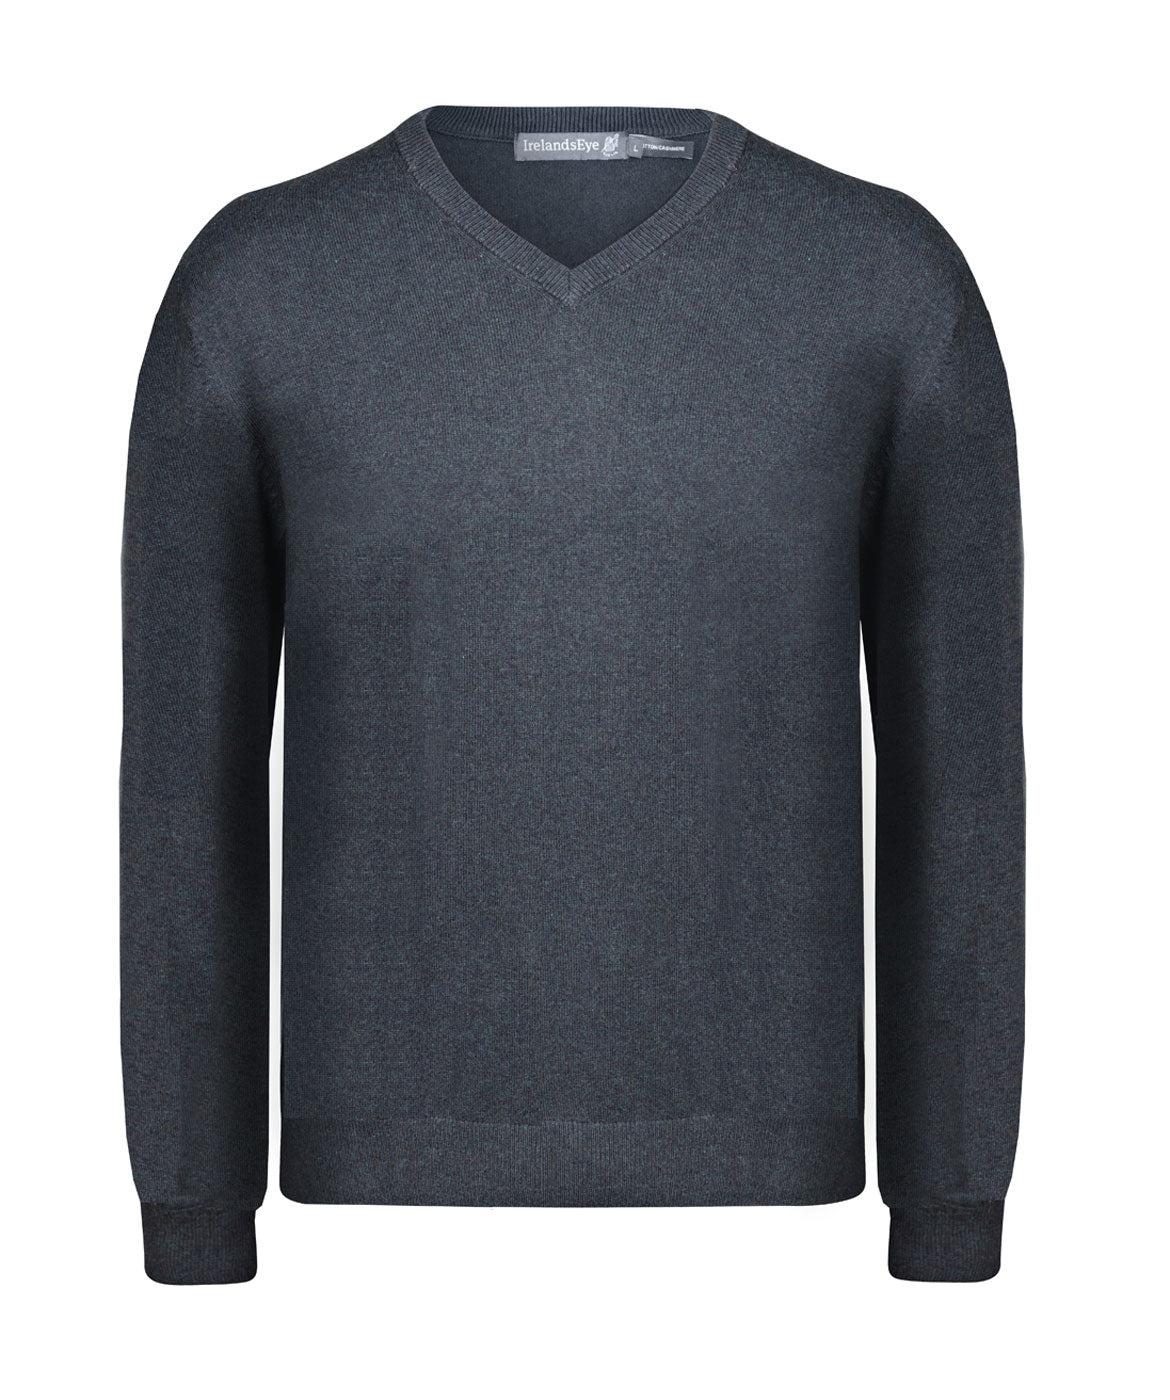 IrelandsEye Knitwear Mens knitted extra fine soft touch v neck sweater Night Forest